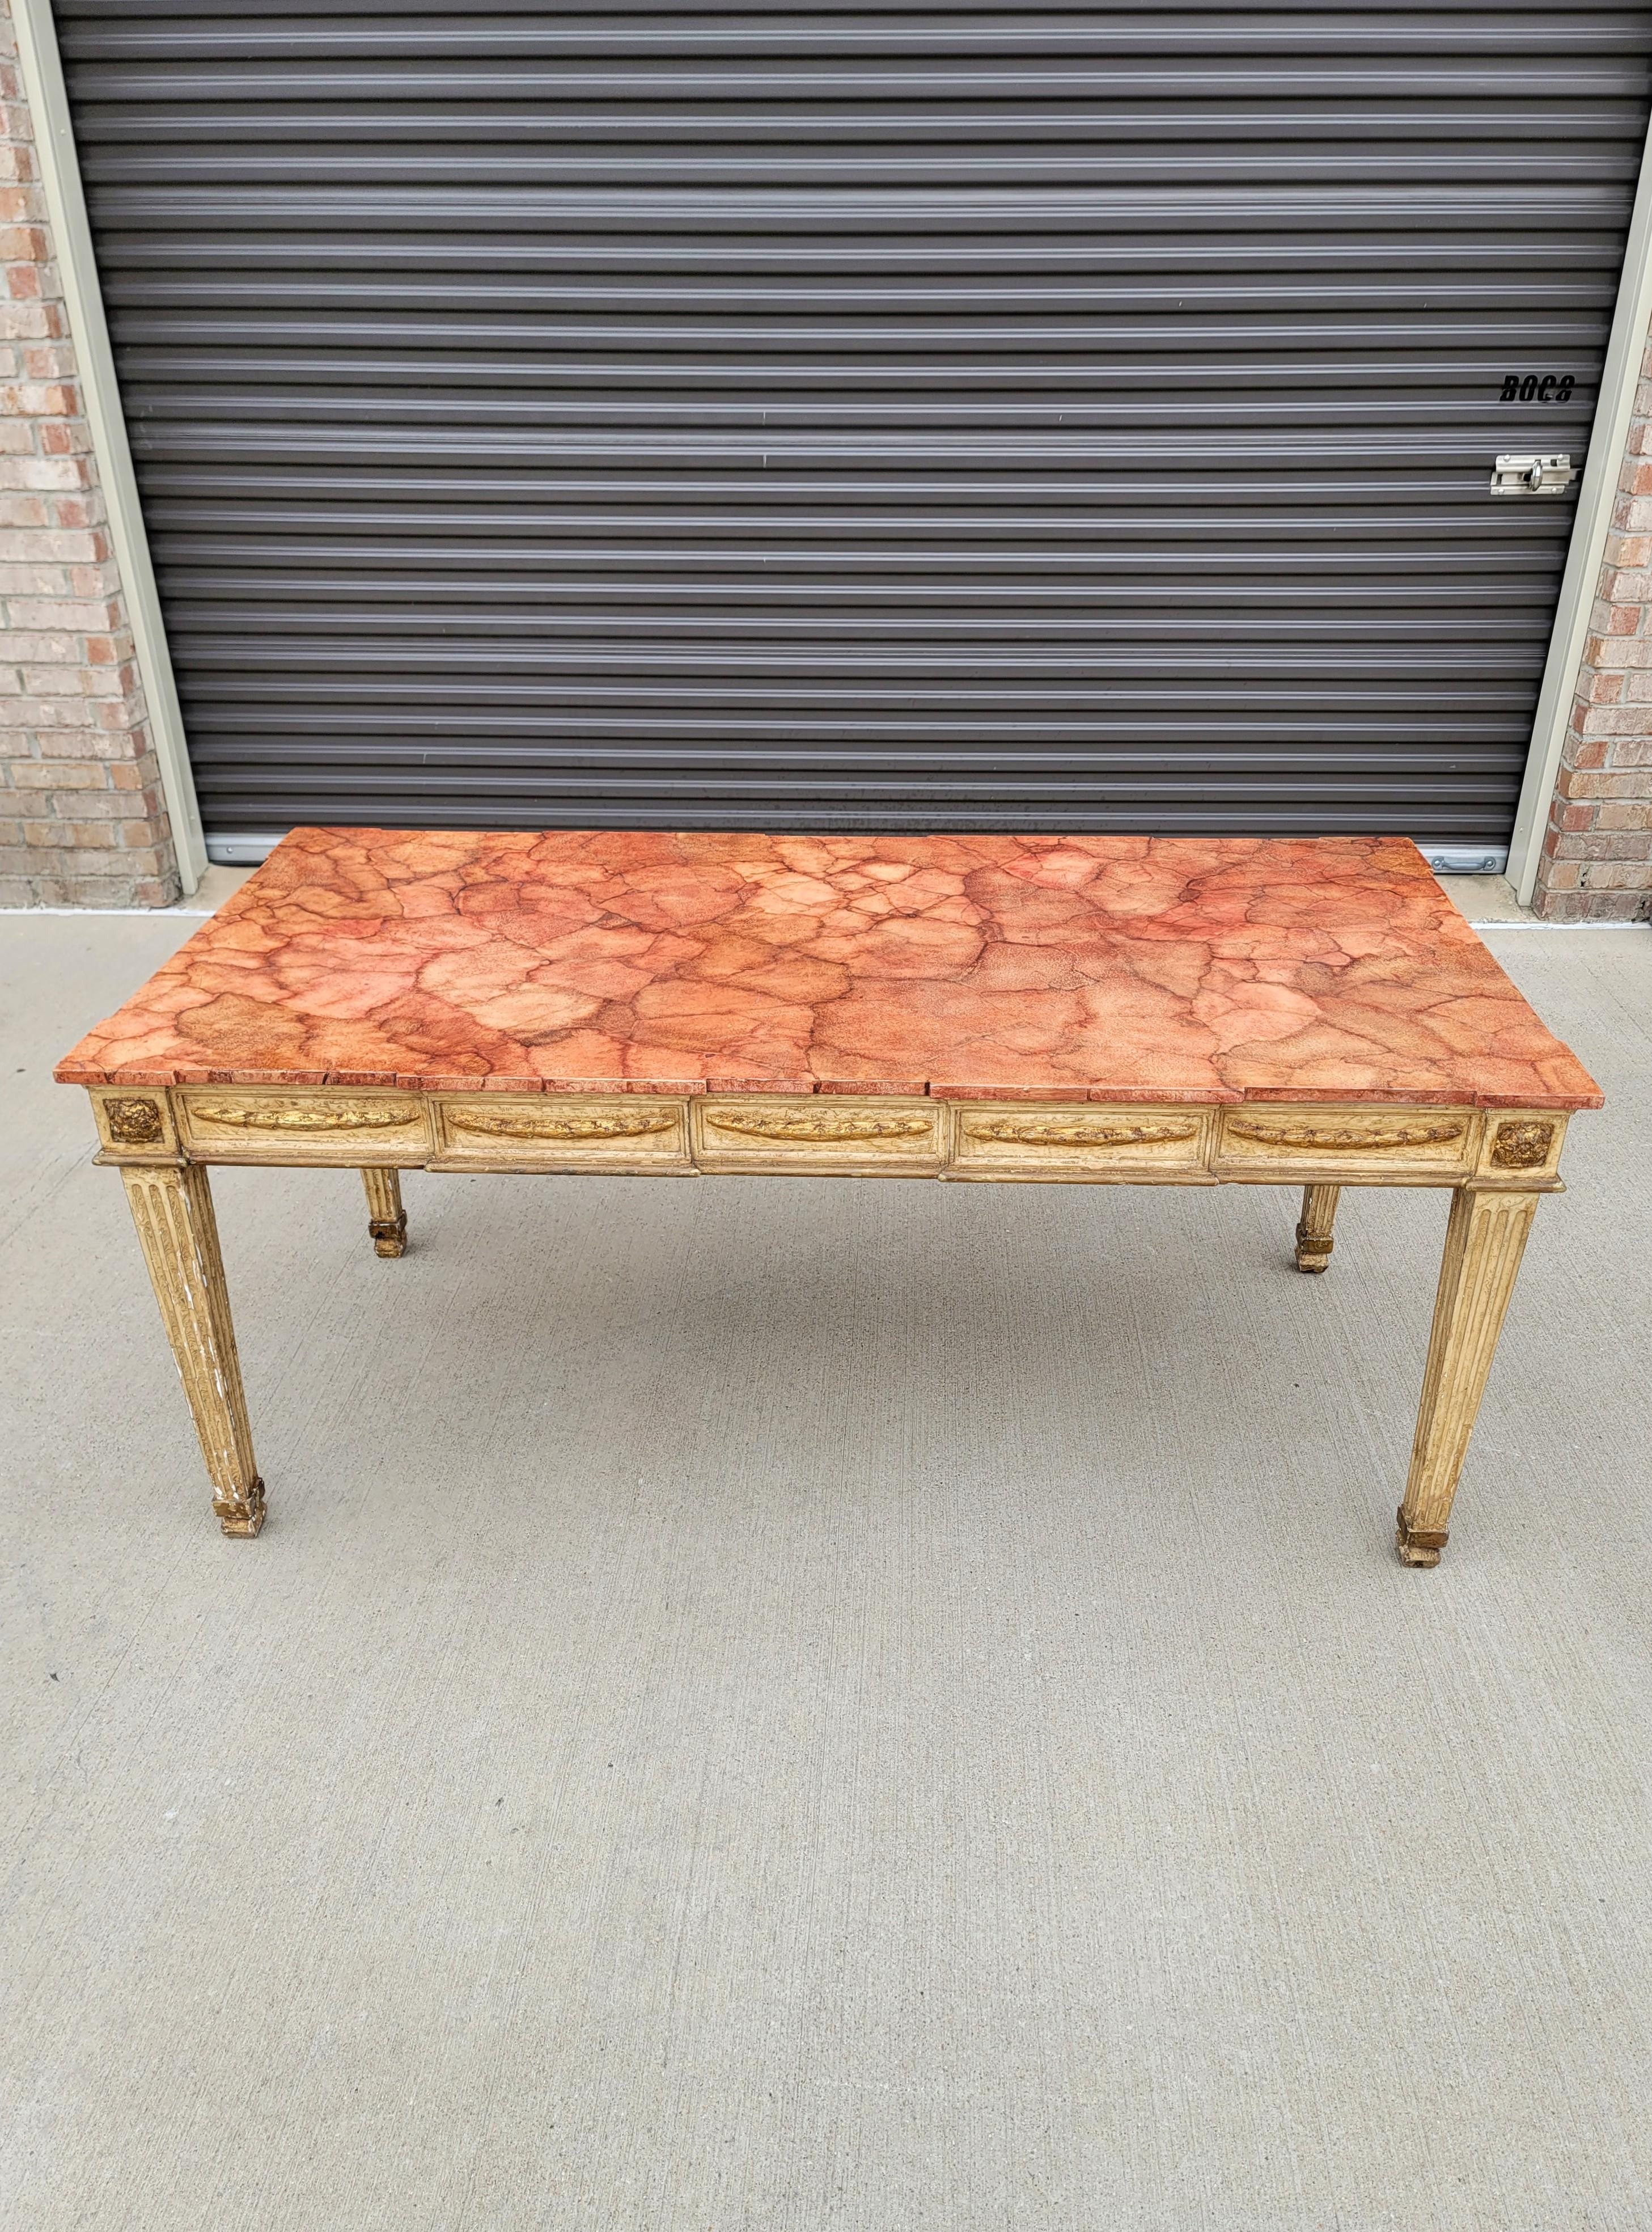 Patina Perfection!! A rare and most impressive Italian hand carved, painted parcel gilt faux marbled verona rosso top table with beautifully aged heavily distressed patina.

Born in Italy in the early 20th century, hand-crafted in elegant and